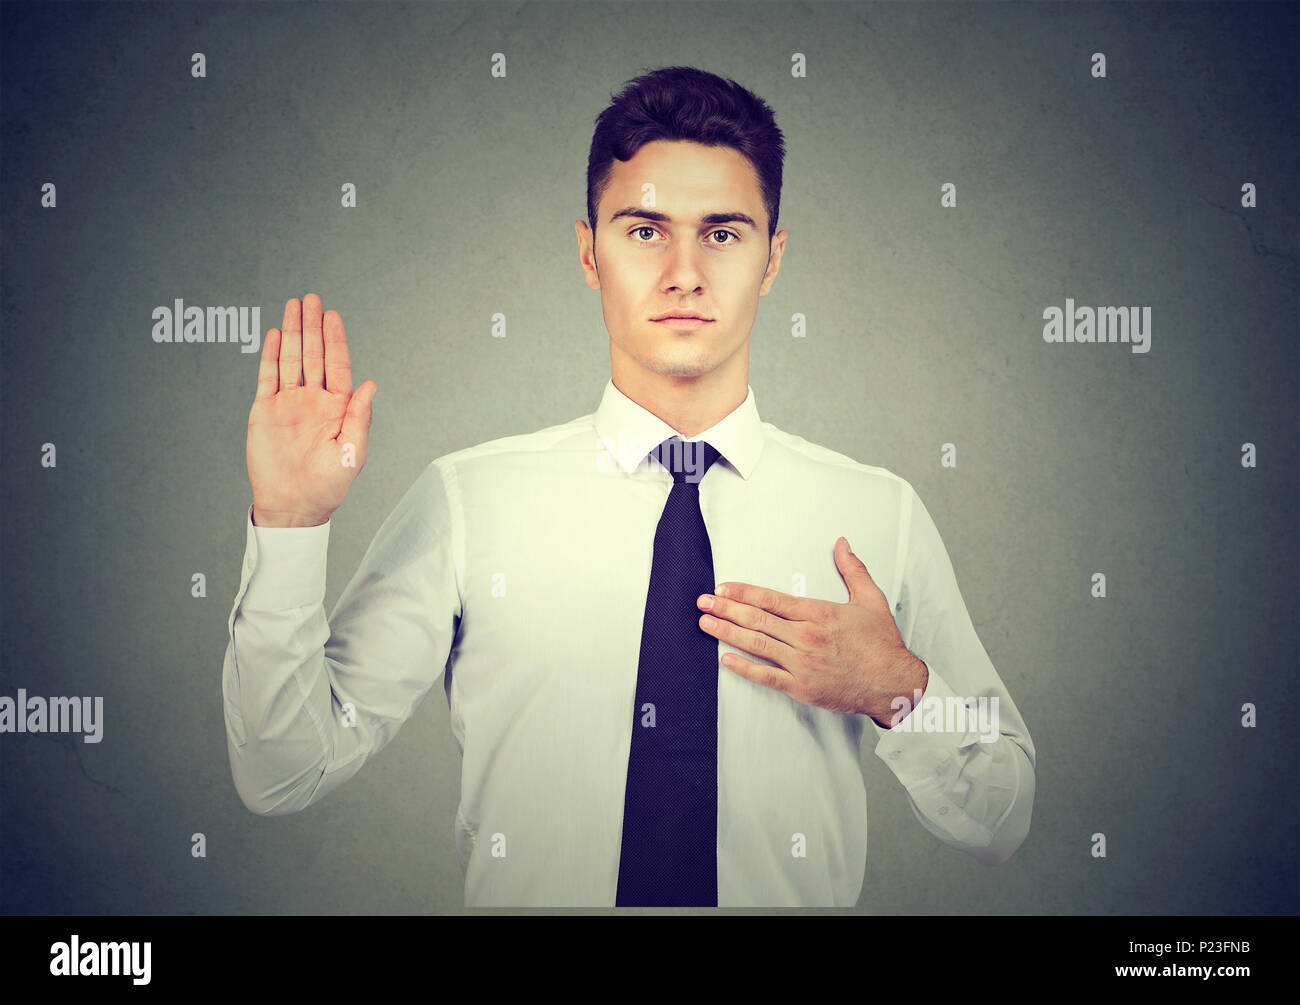 Handsome business man making an oath promise on gray background Stock Photo